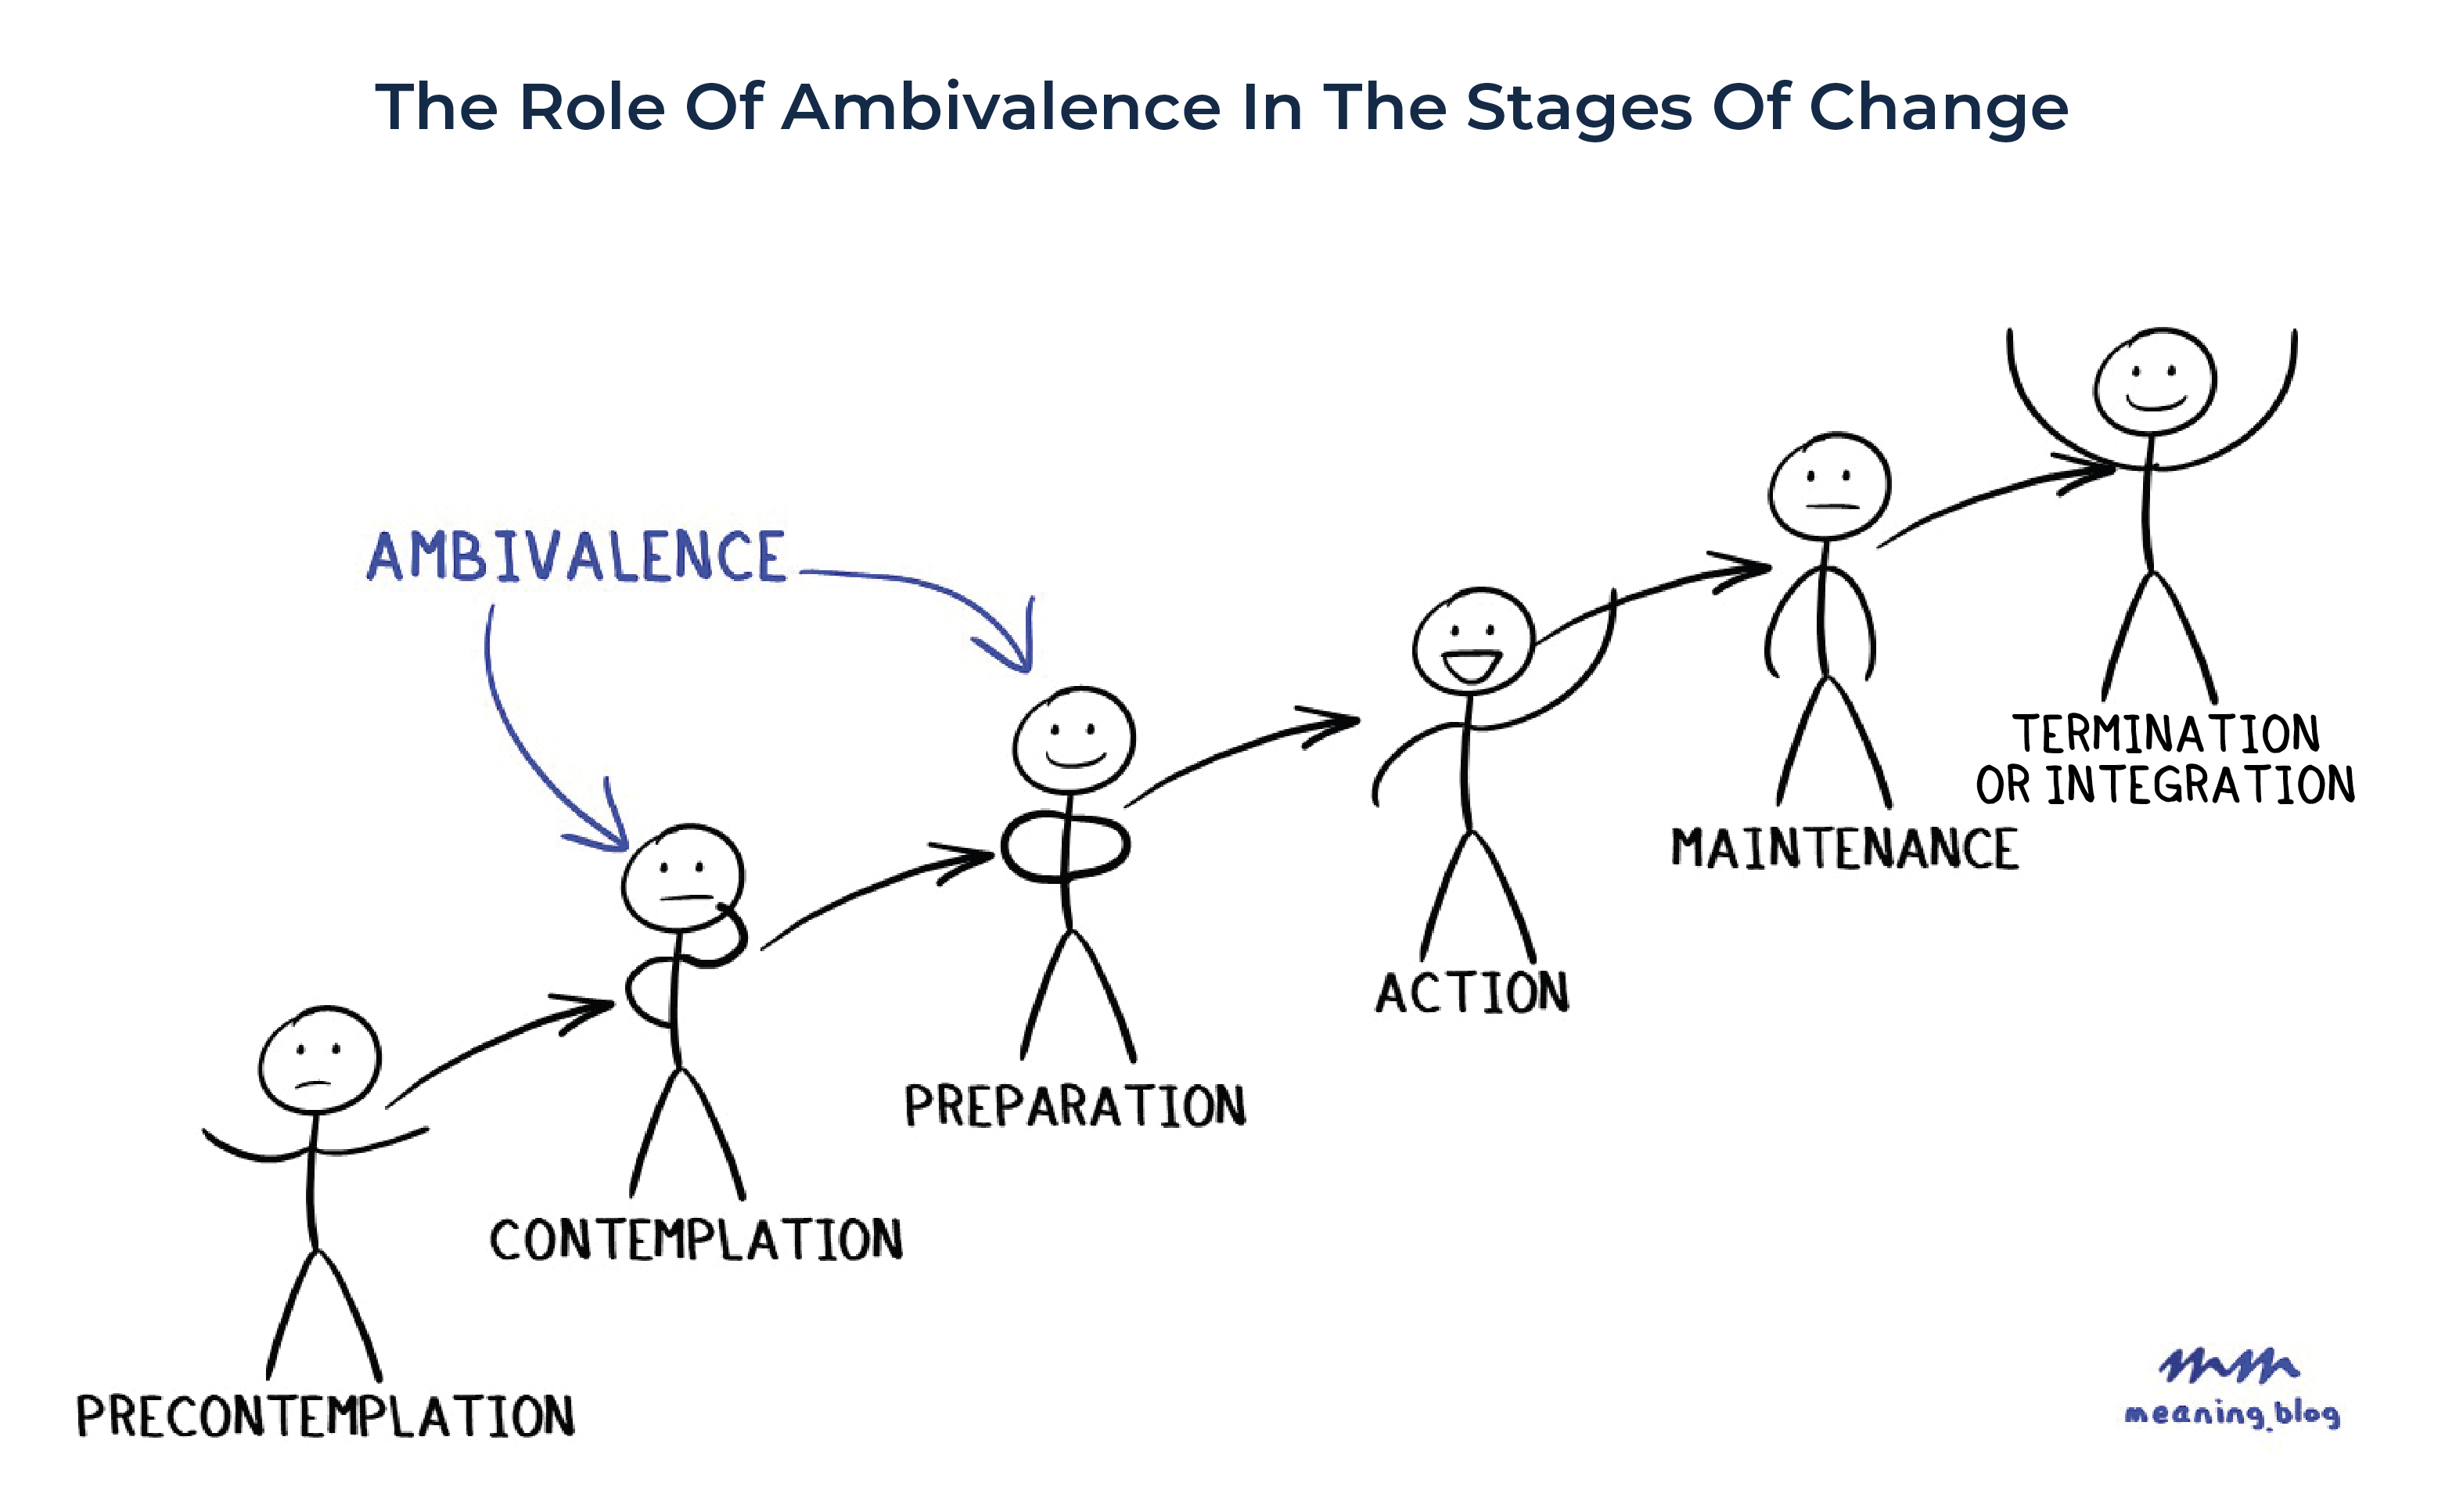 The Role Of Ambivalence In The Stages Of Change